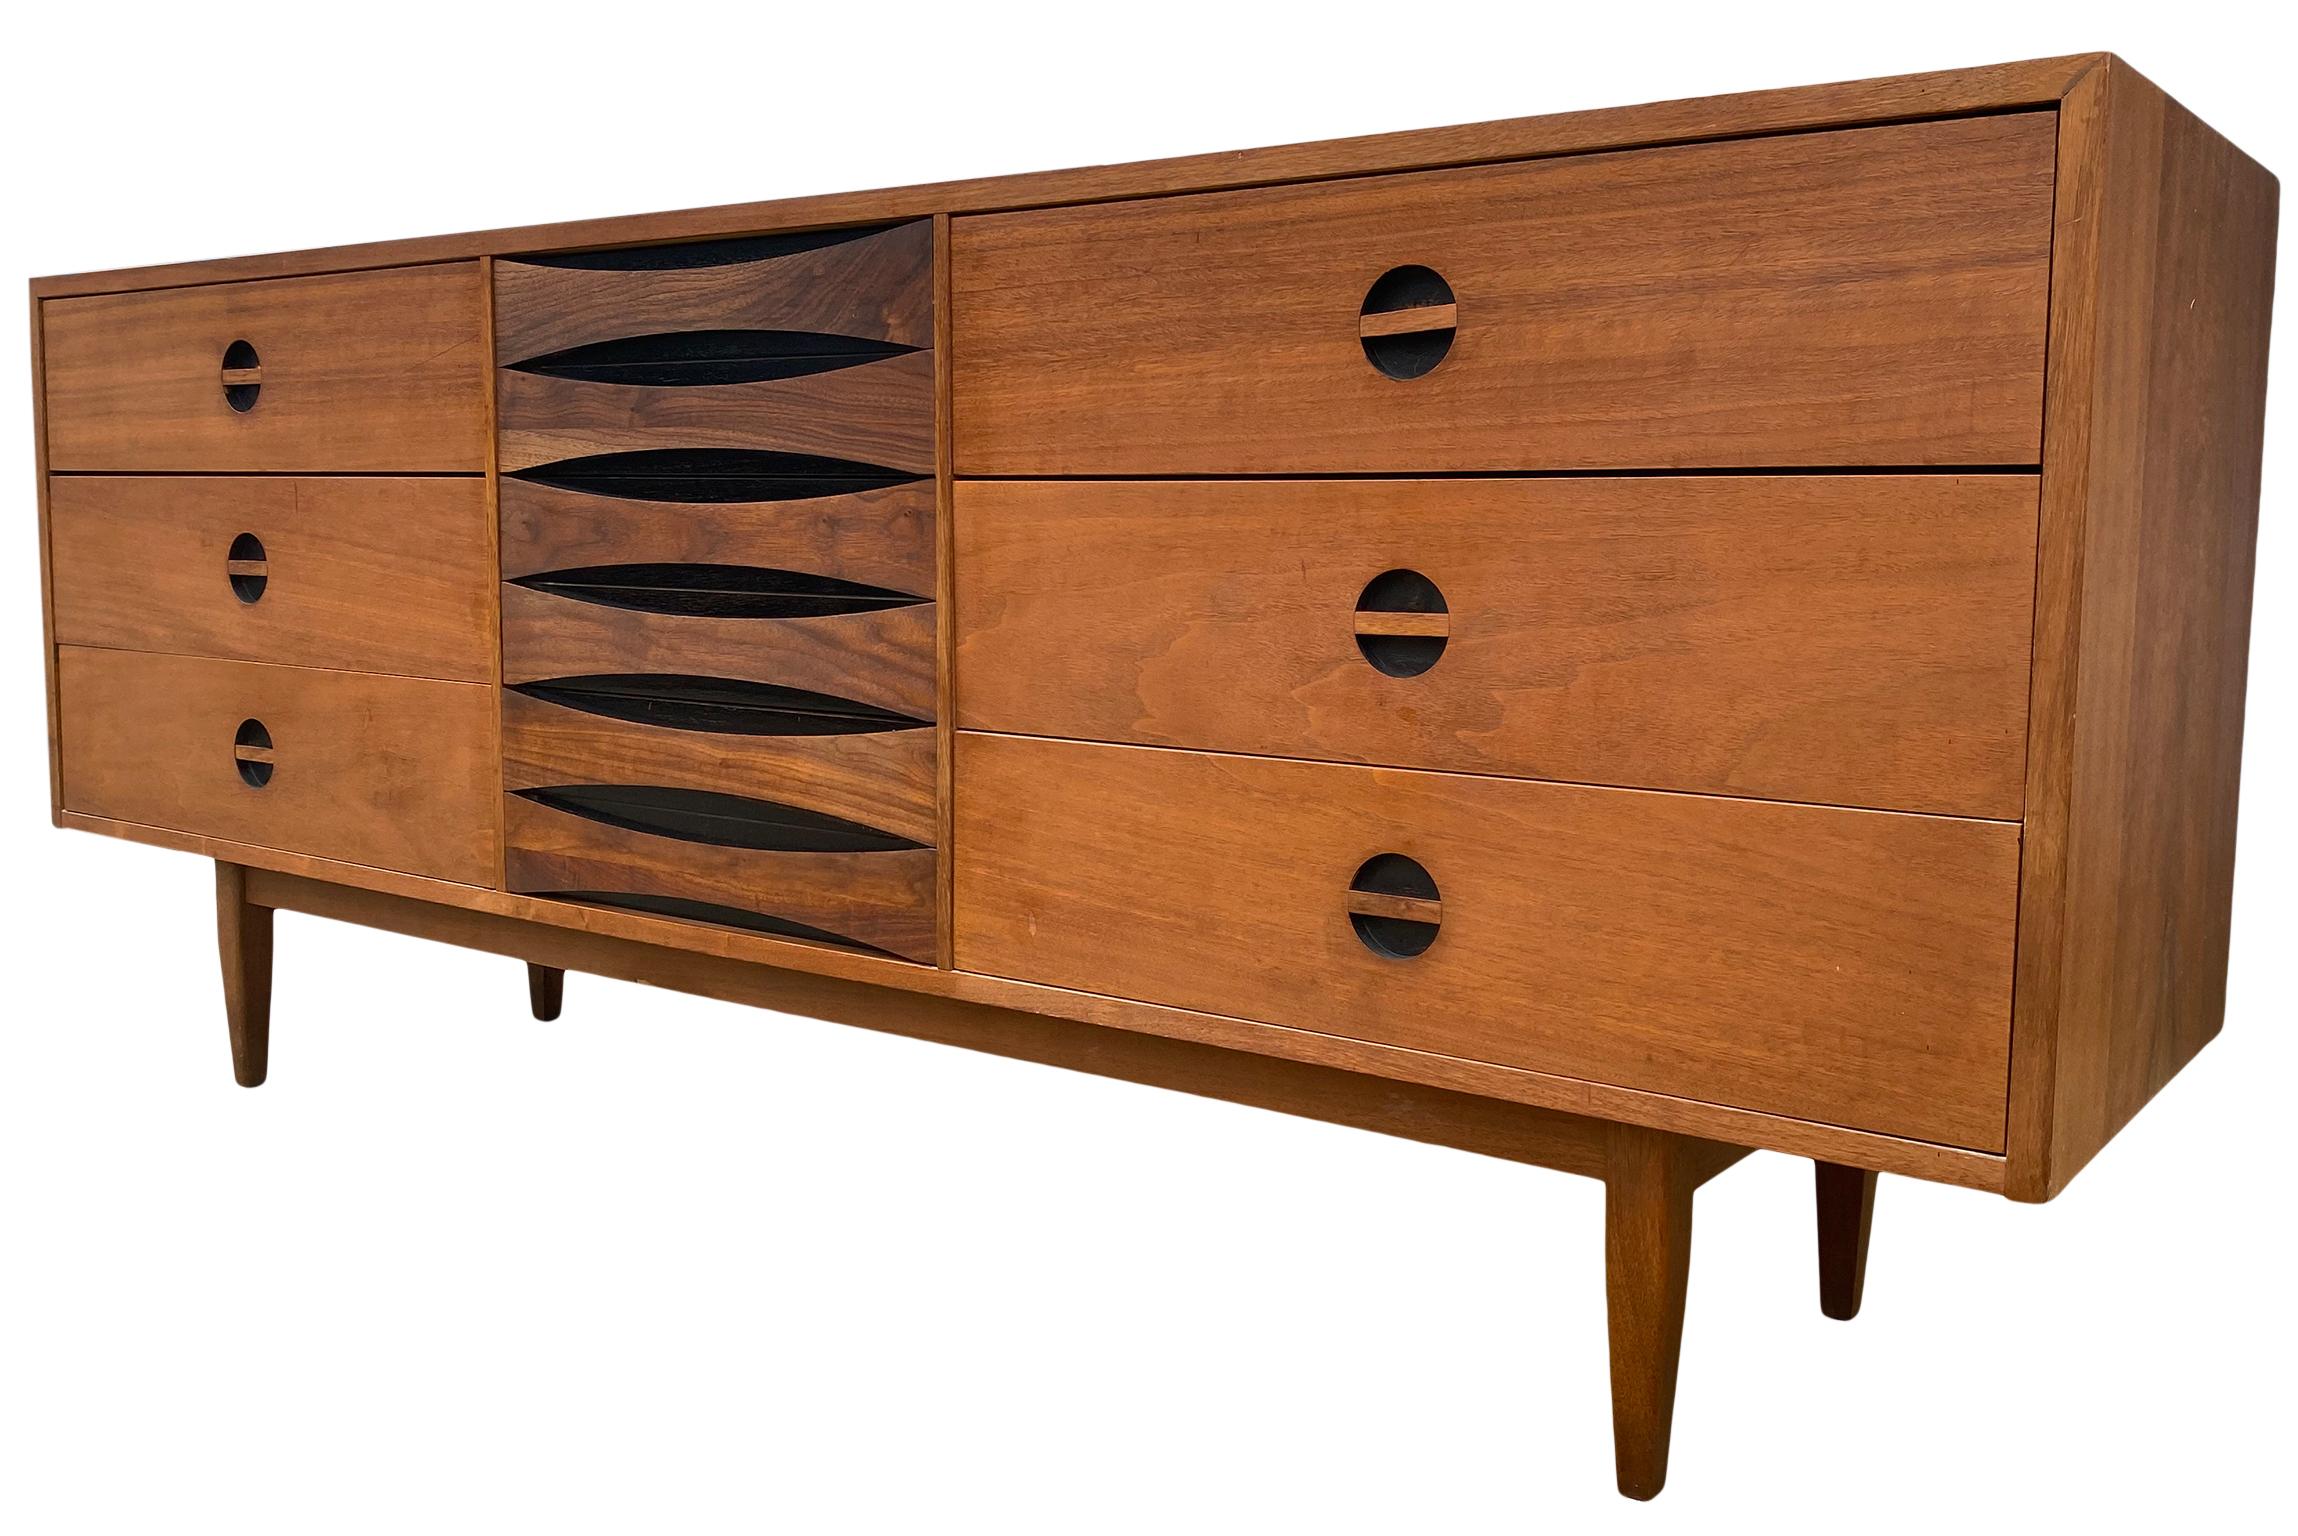 An exceptional long low Mid-Century Modern Arne Vodder style walnut 9-drawer dresser credenza by West Michigan Furniture Co. The dresser features beautiful walnut wood grain with sculpted recessed drawer pulls. It offers ample storage, with nine